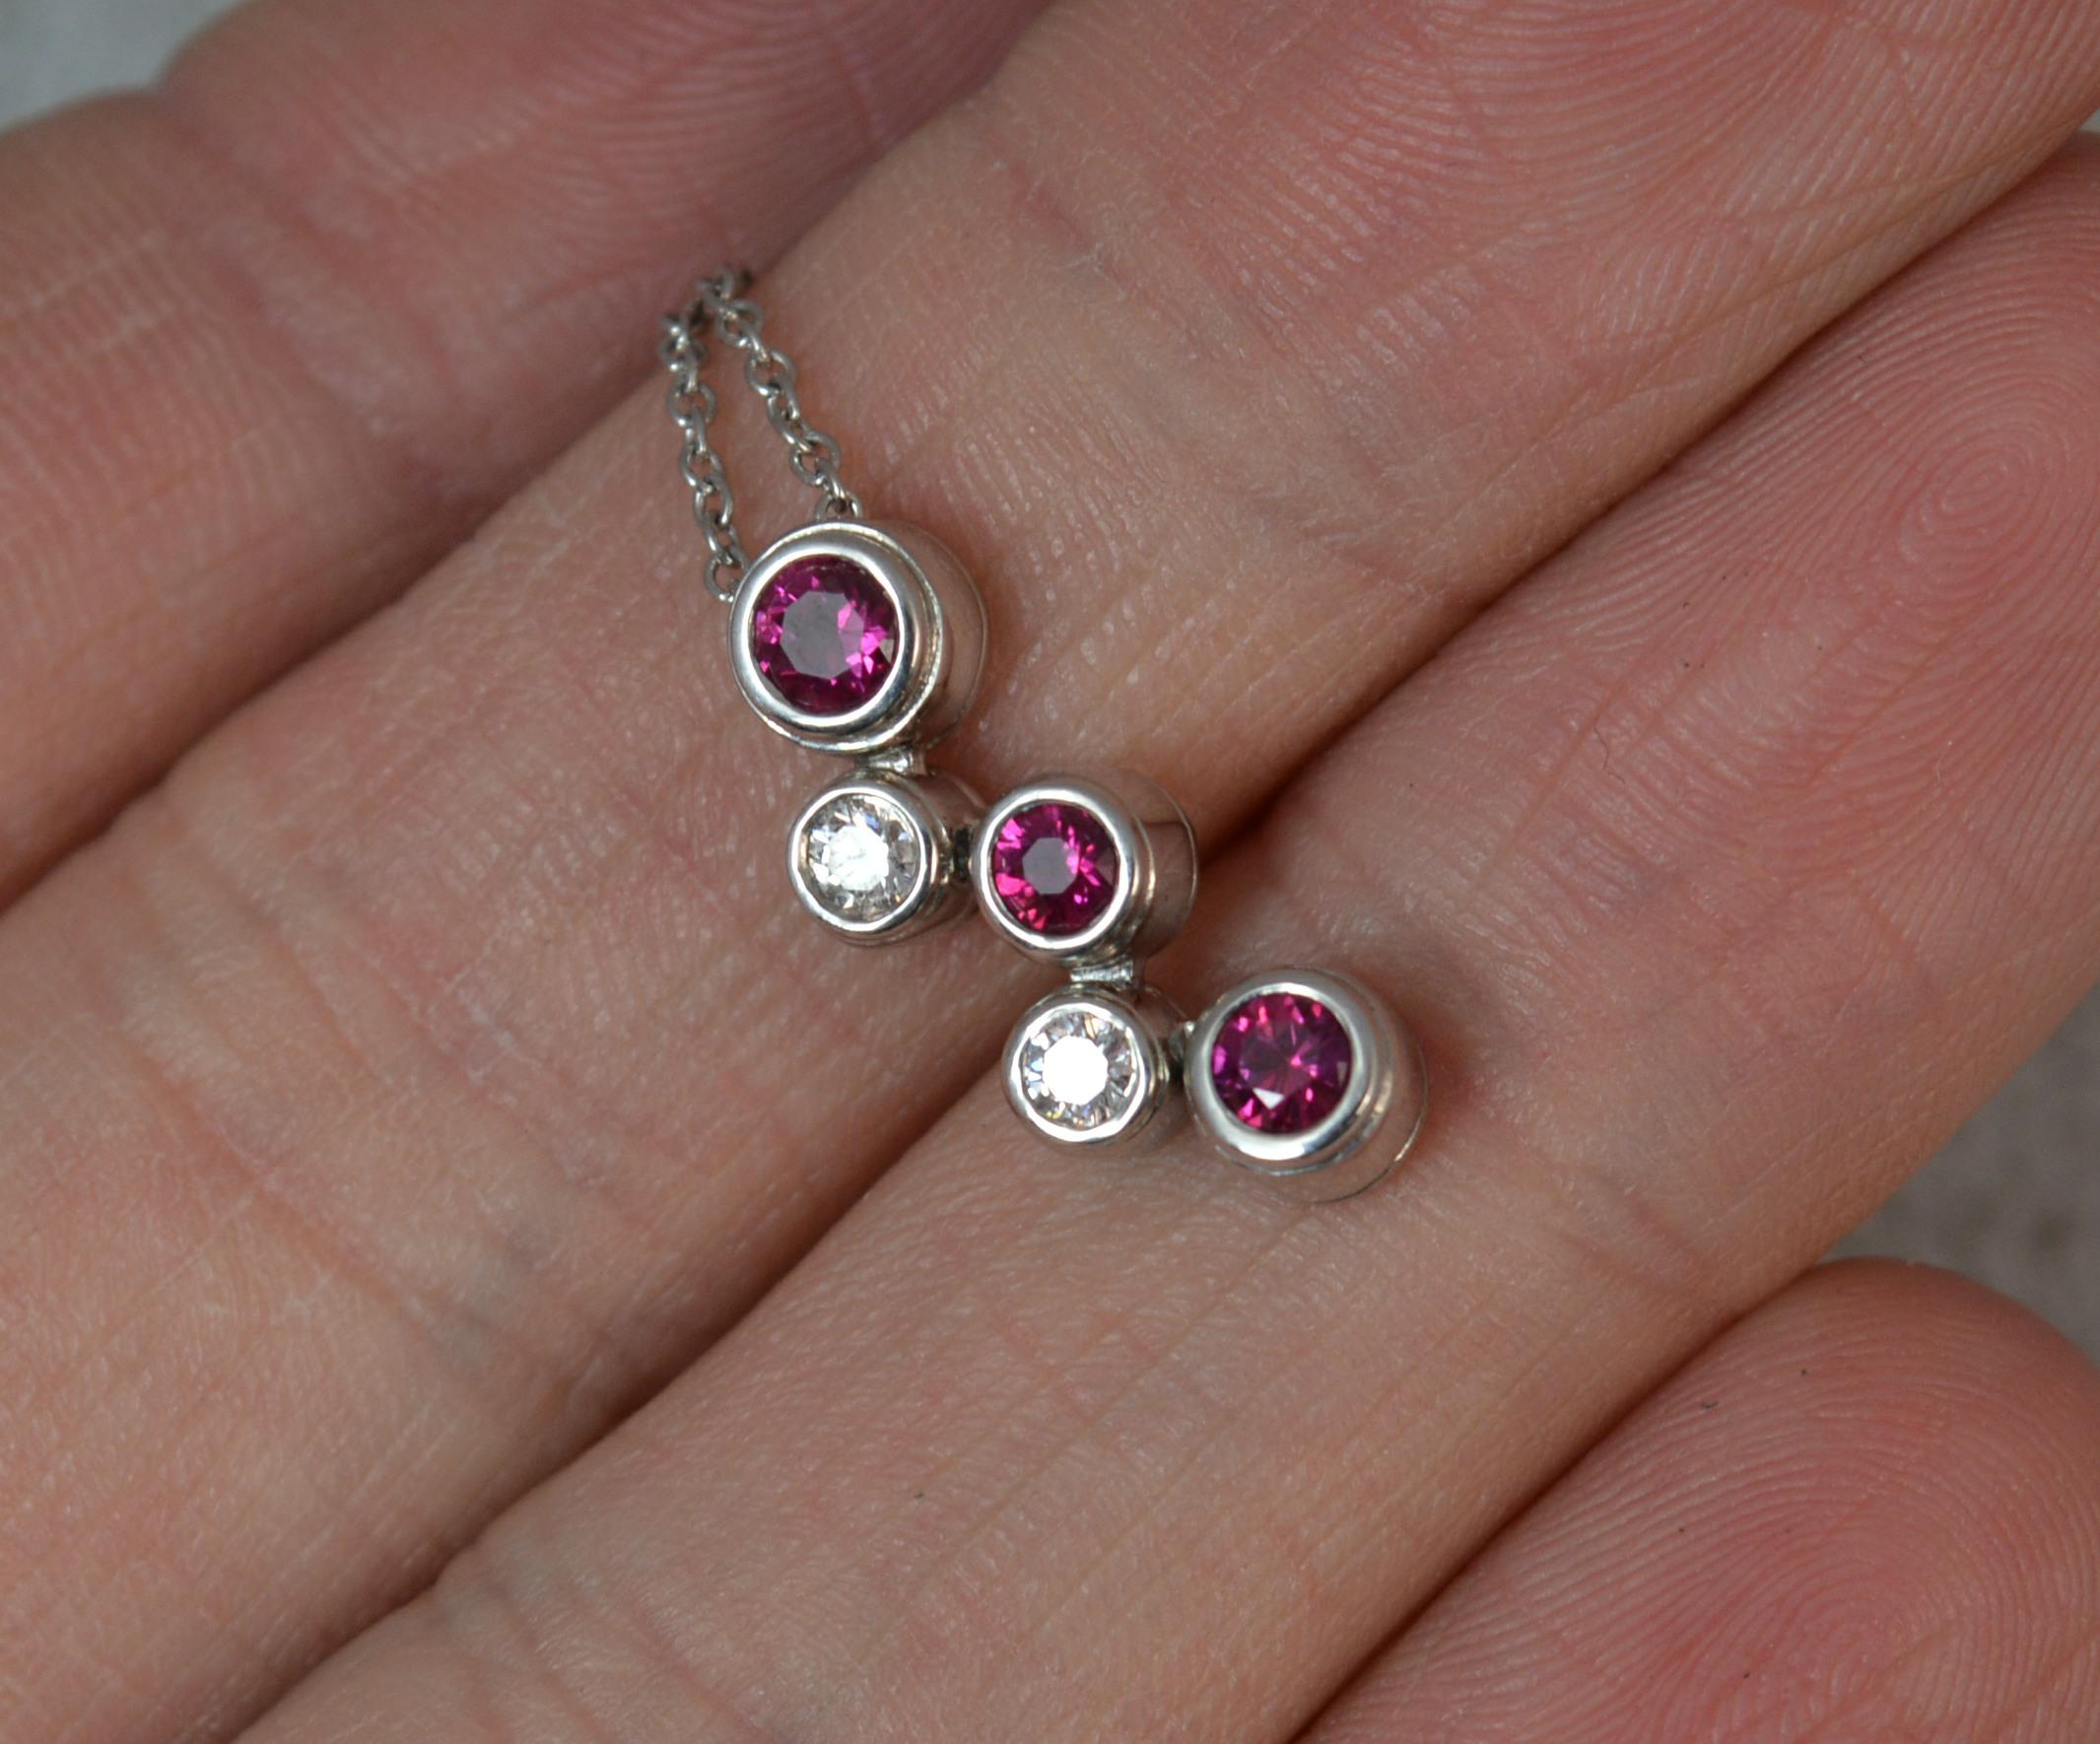 A fantastic TIFFANY & CO designer pendant.
950 grade platinum pendant and chain.
Designed with a five stone bezel set drop bubble like pendant drop. Three rubies and two diamonds. Stunning quality. Complete with fine links.
No longer available new